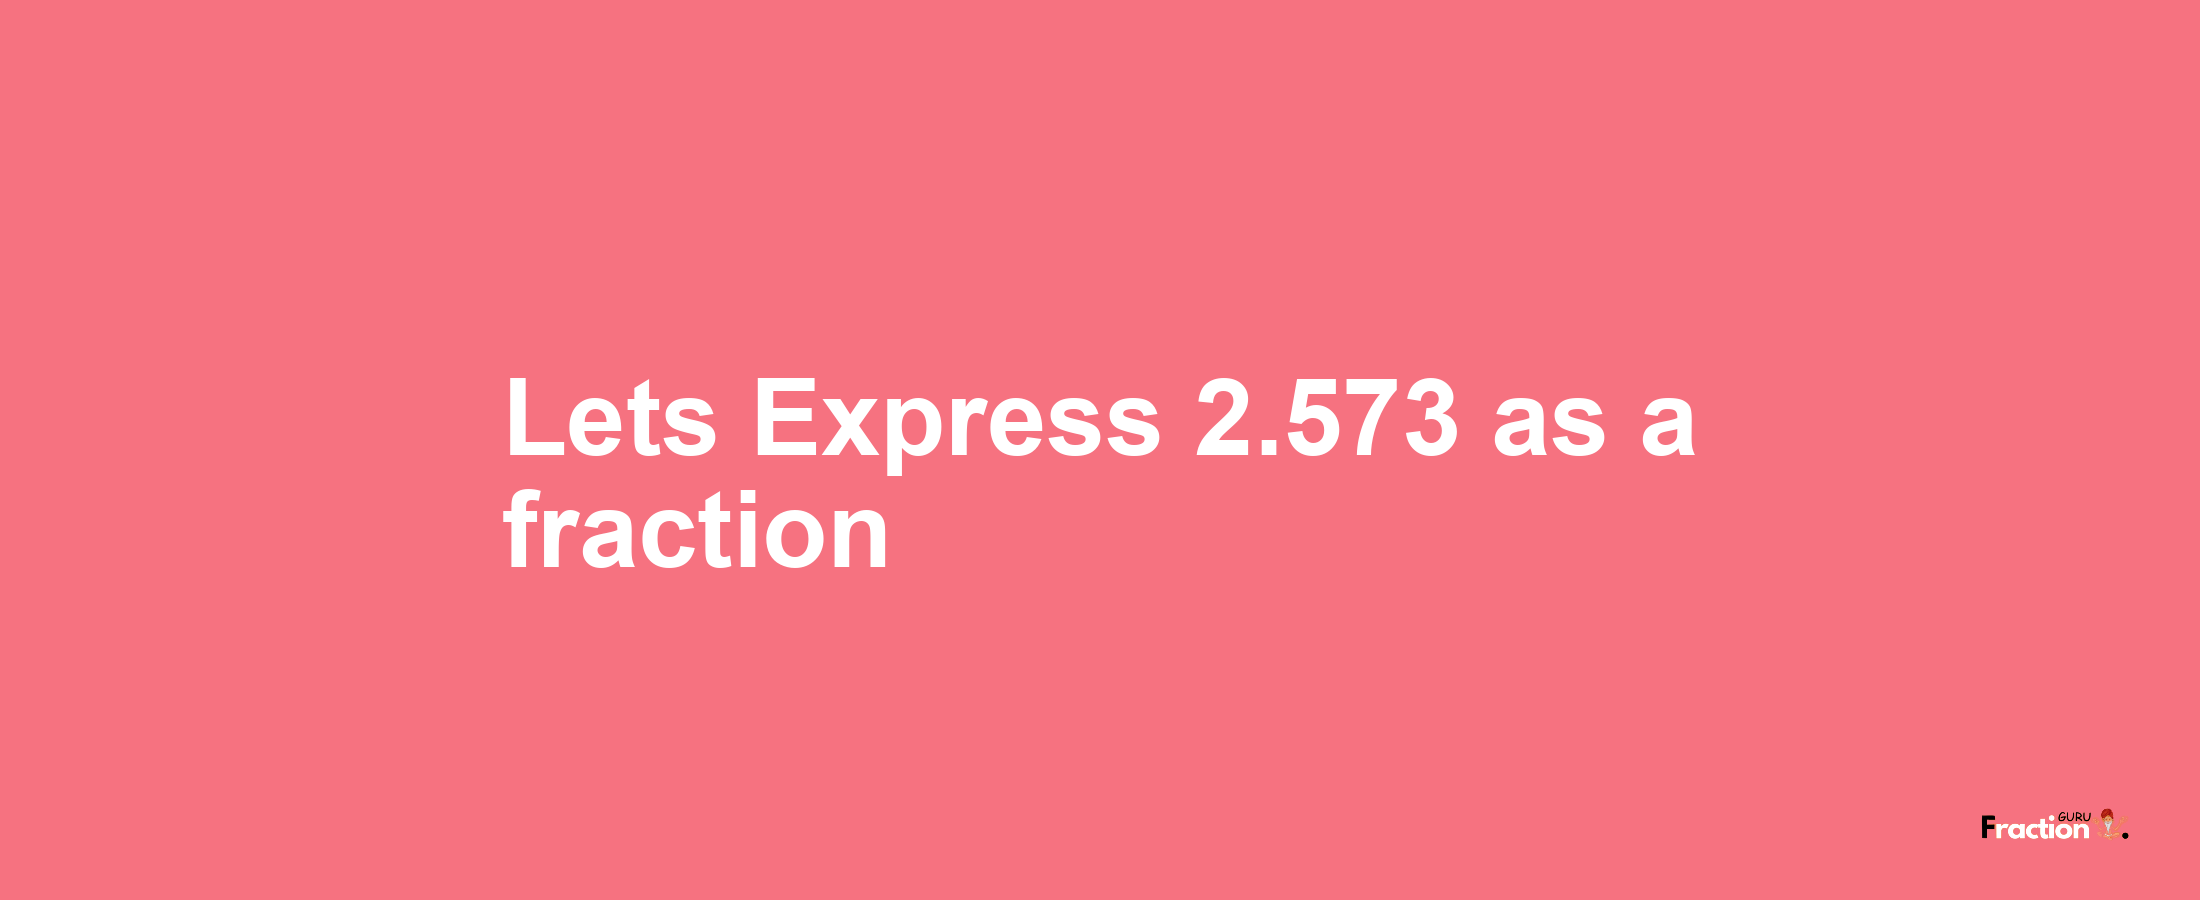 Lets Express 2.573 as afraction